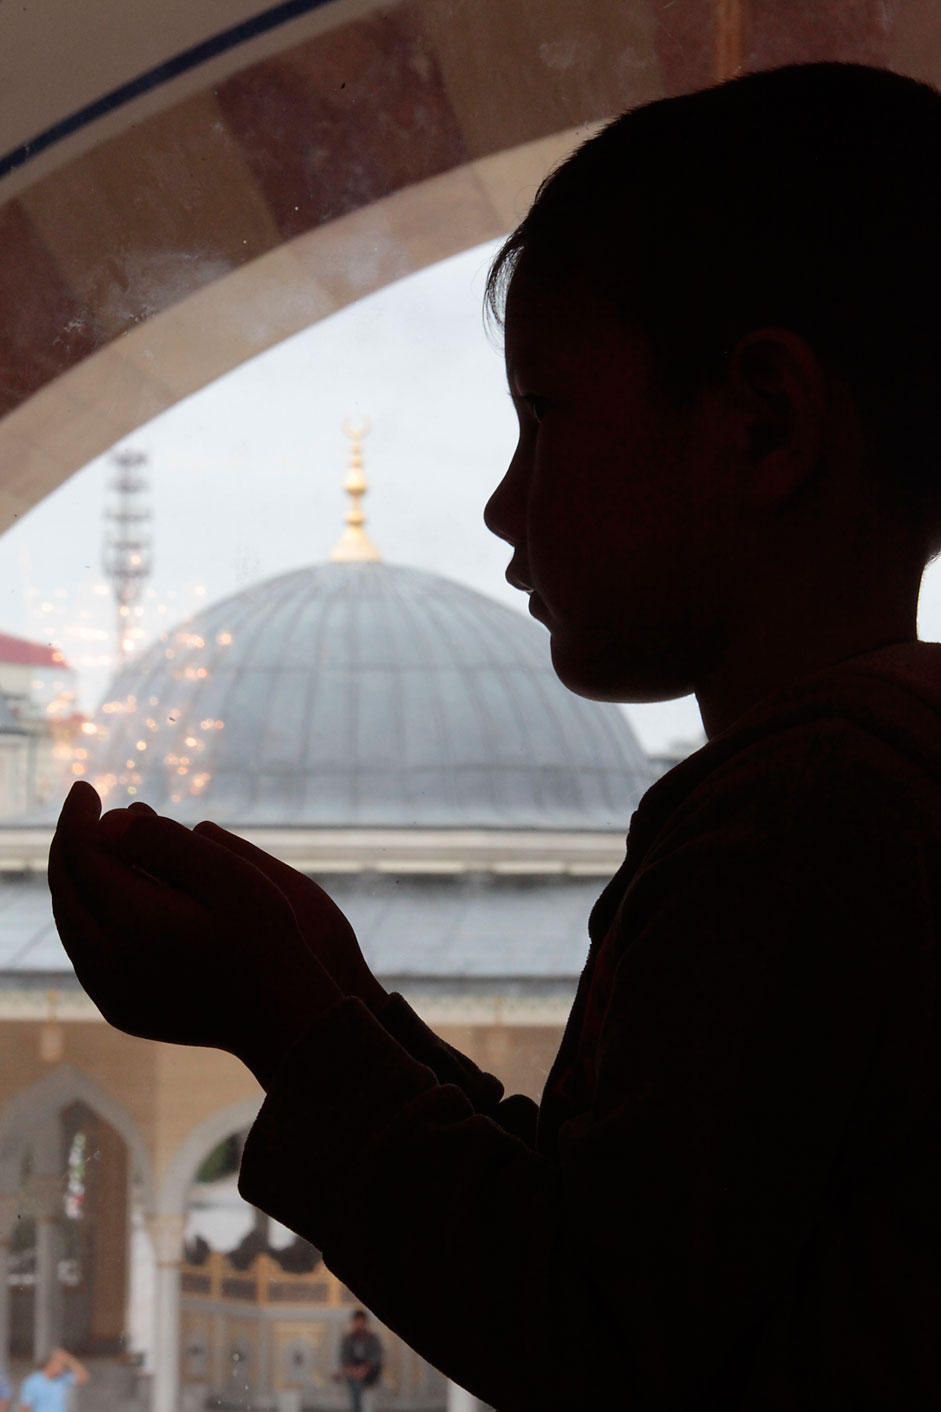 A Chechen boy performs an Eid al-Fitr prayer to mark the end of theholy fasting month of Ramadan in Chechen capital of Grozny, Russia,Friday, July 17, 2015. Eid al-Fitr prayer marks the end of the holyfasting month of Ramadan.